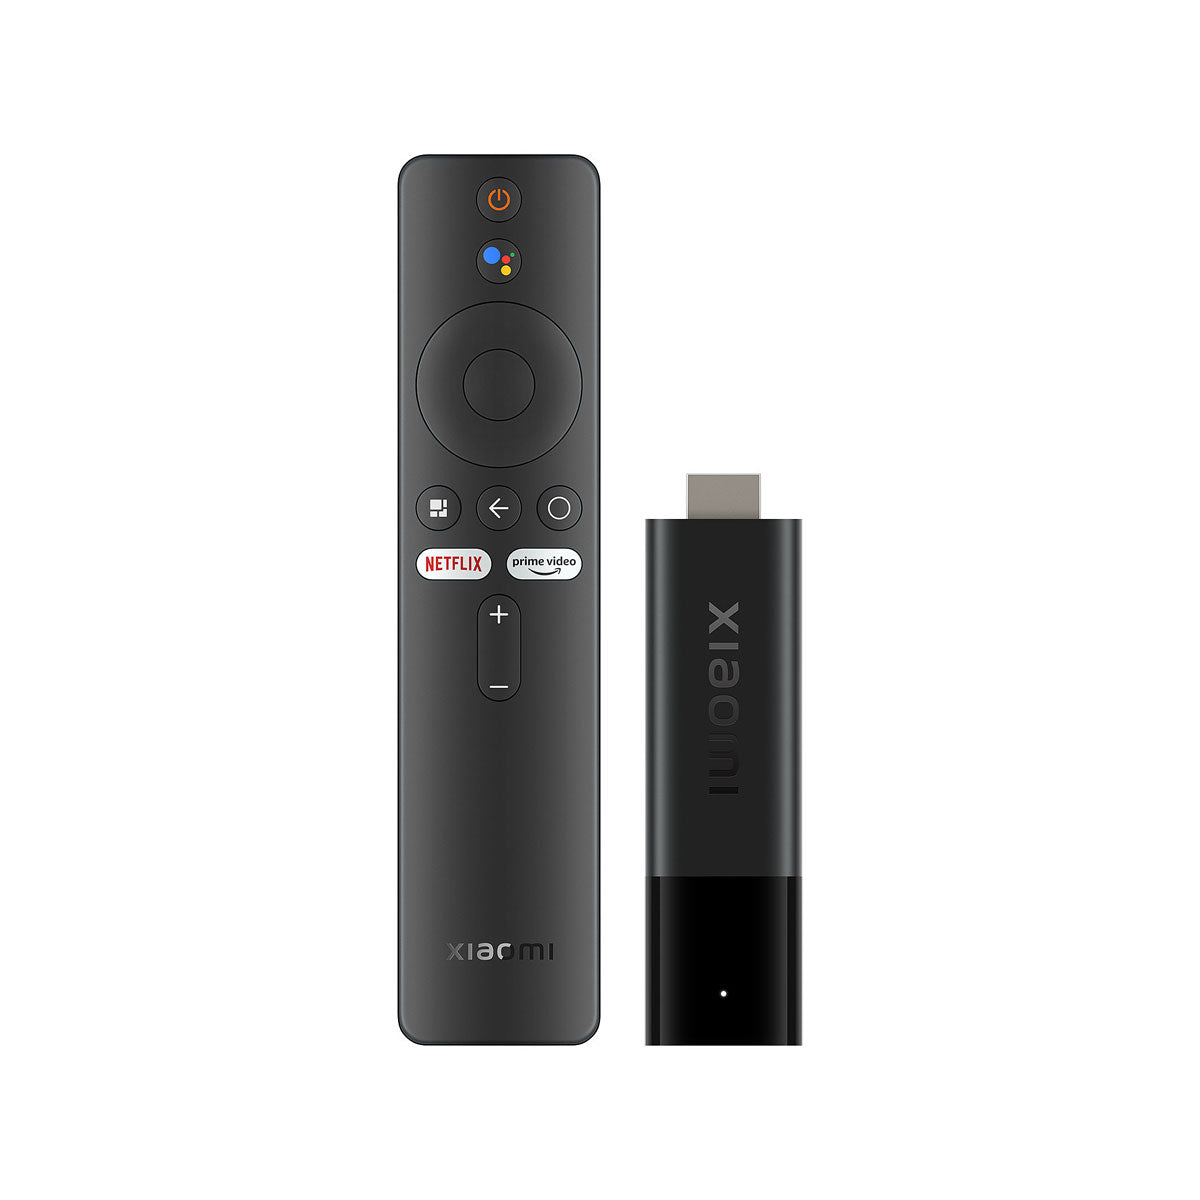 Xiaomi TV Stick 4K - Streaming Media Player with Remote Control and Google Assistant